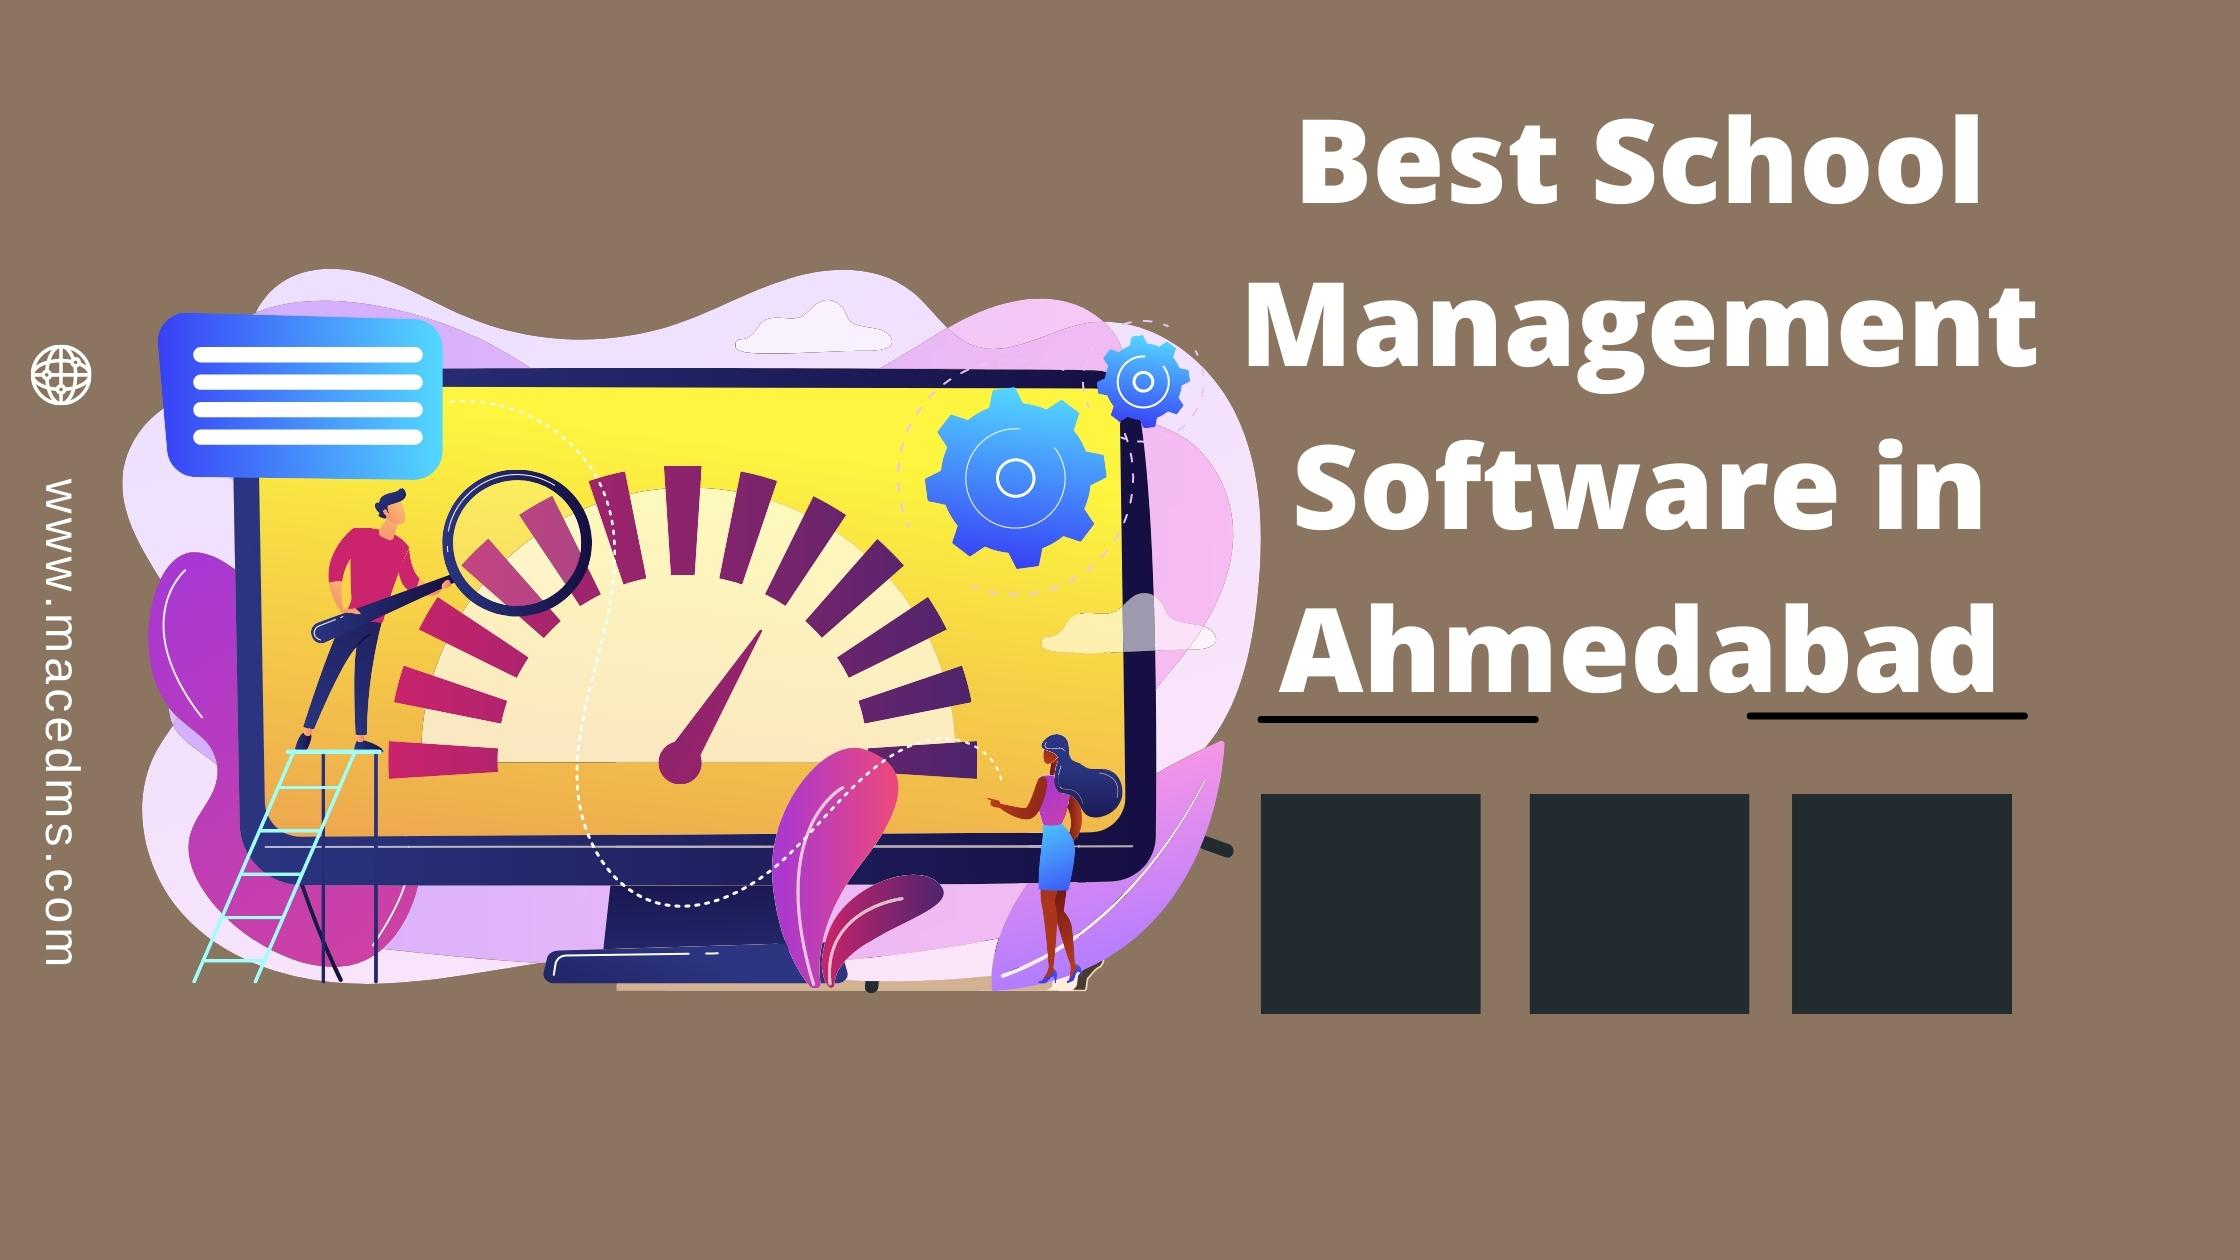 Best School Management Software in Ahmedabad